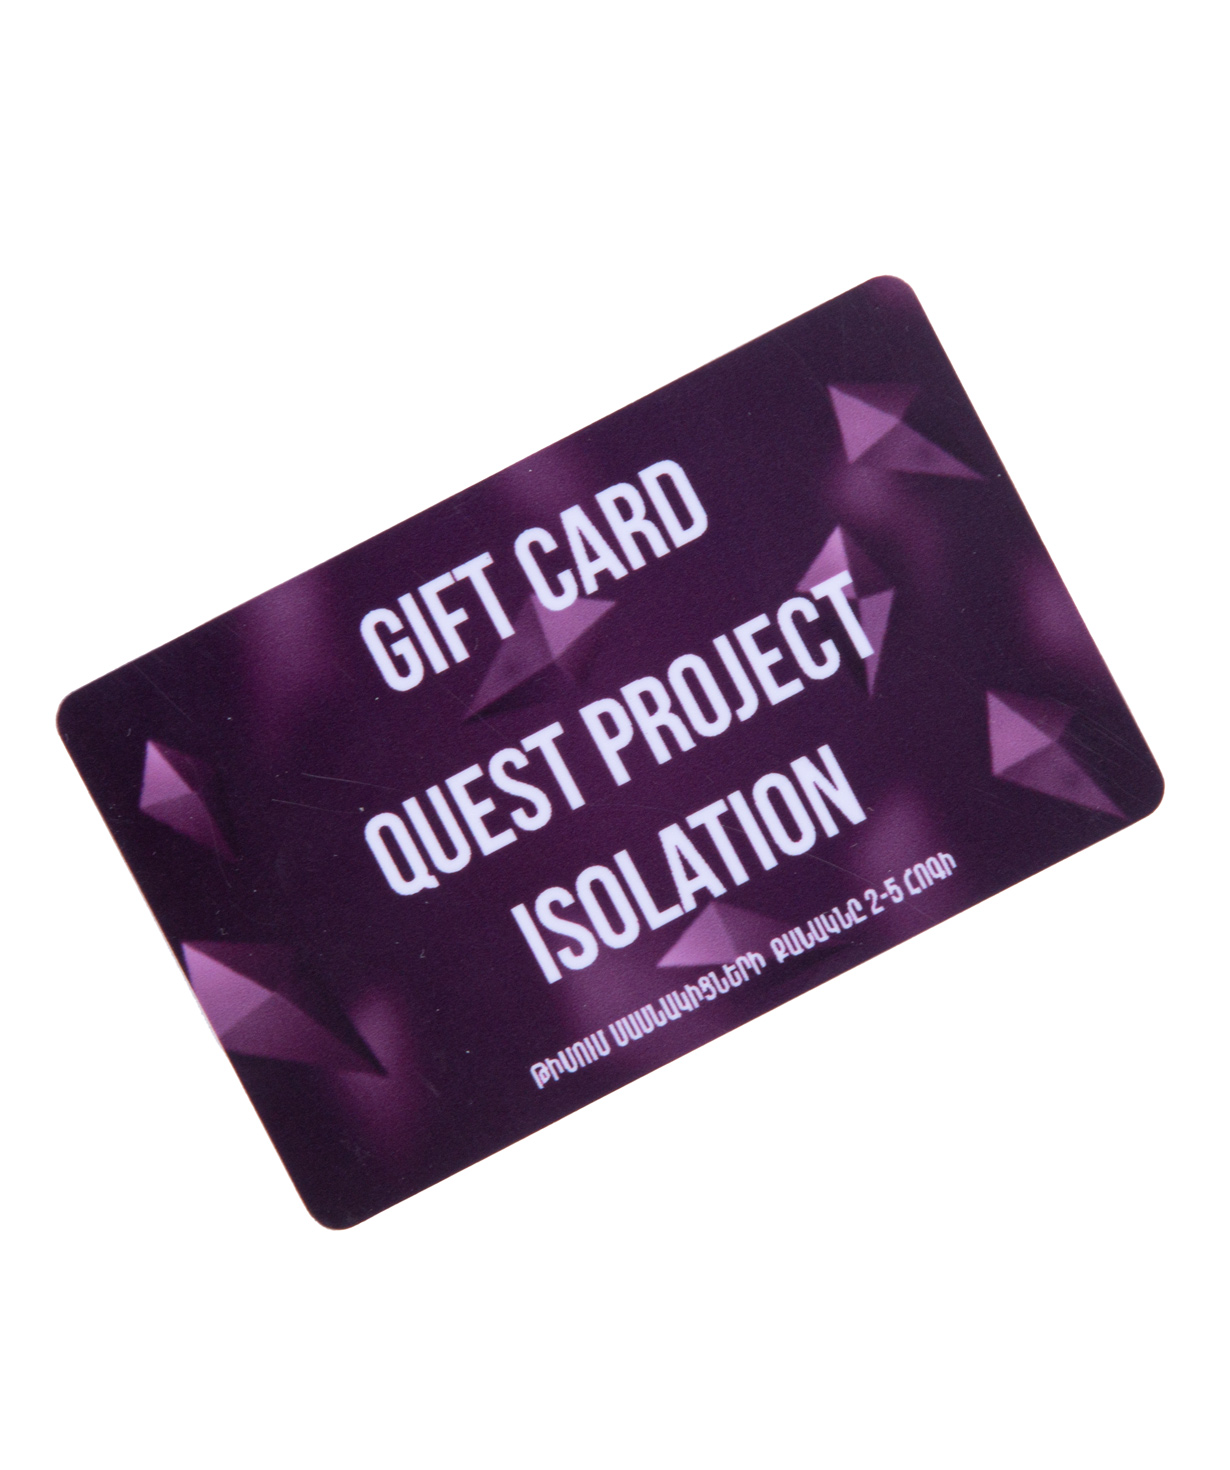 Gift card ''Quest Project Isolation'' The Imitation Game